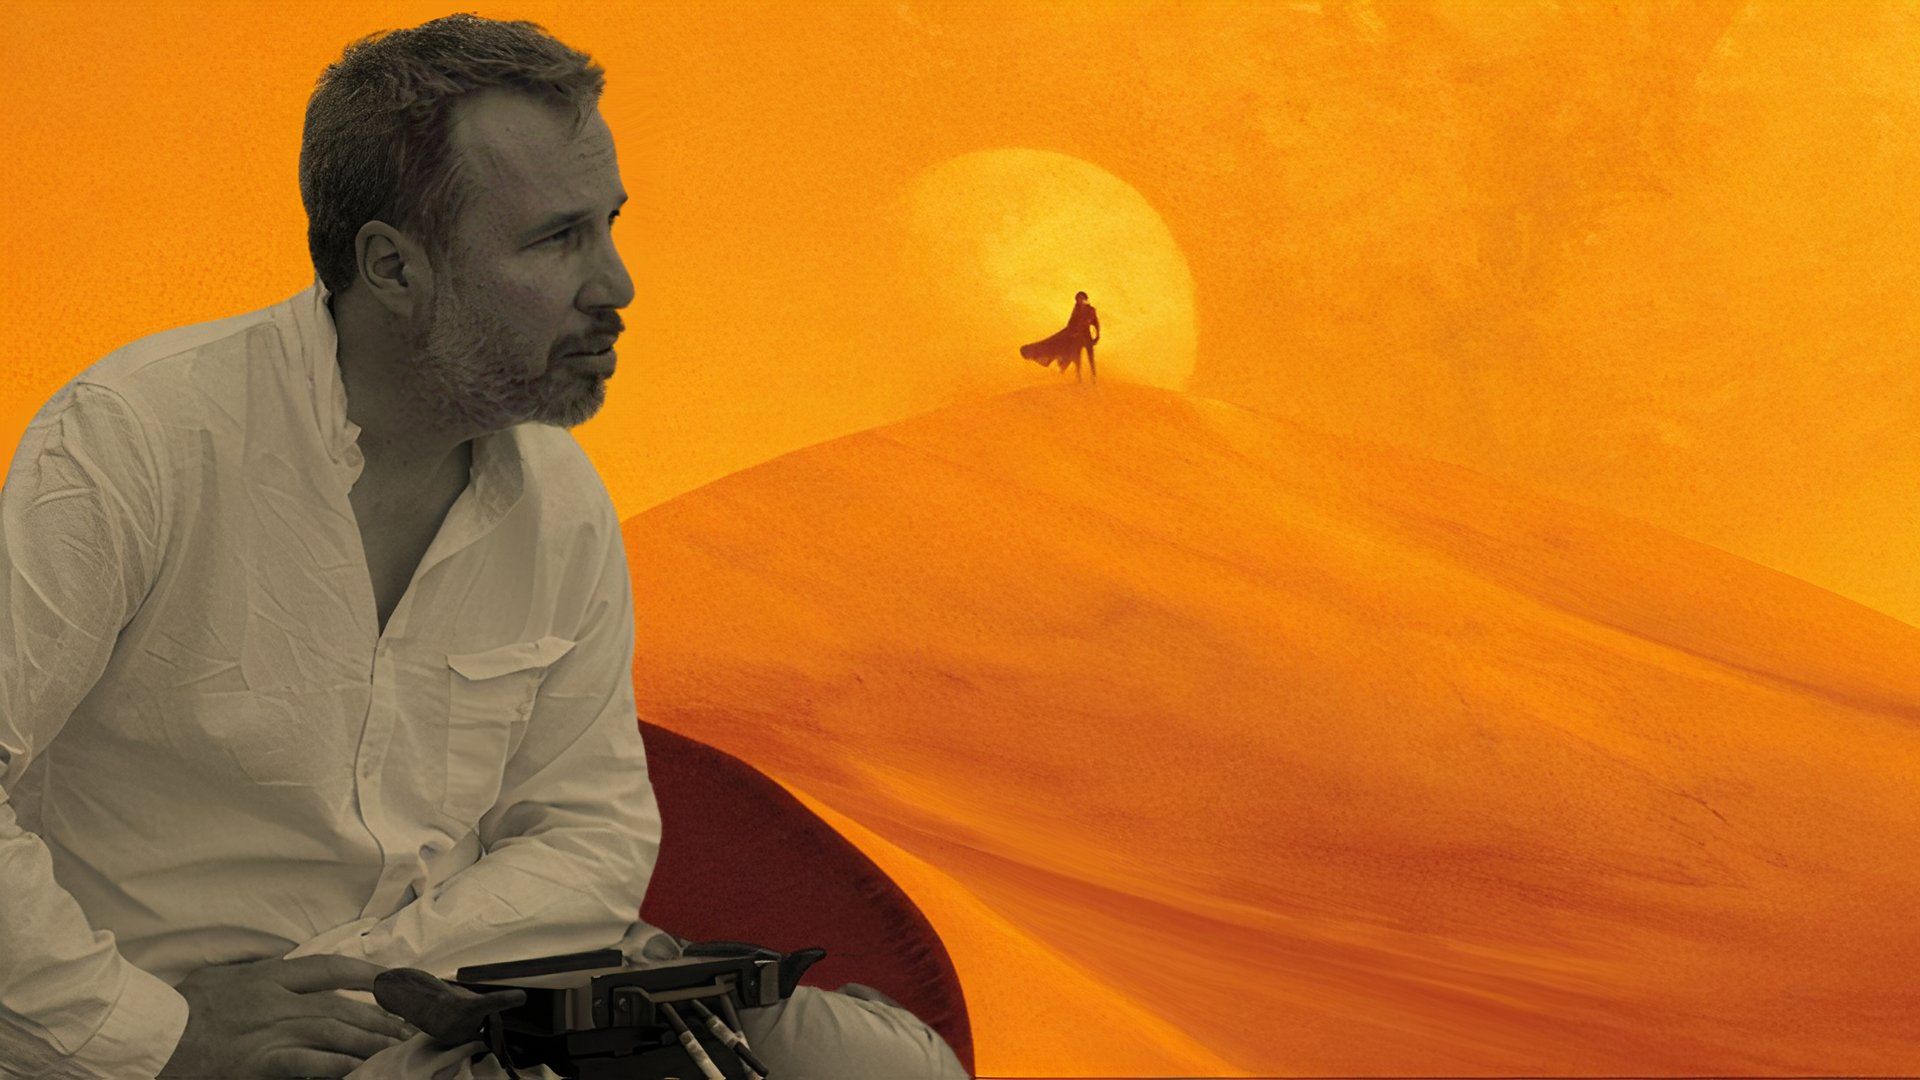 An edit of Denis Villeneuve directing Dune with the cover art for the book featuring someone standing in a desert in DuneAn edit of Denis Villeneuve directing Dune with the cover art for the book featuring someone standing in a desert in Dune